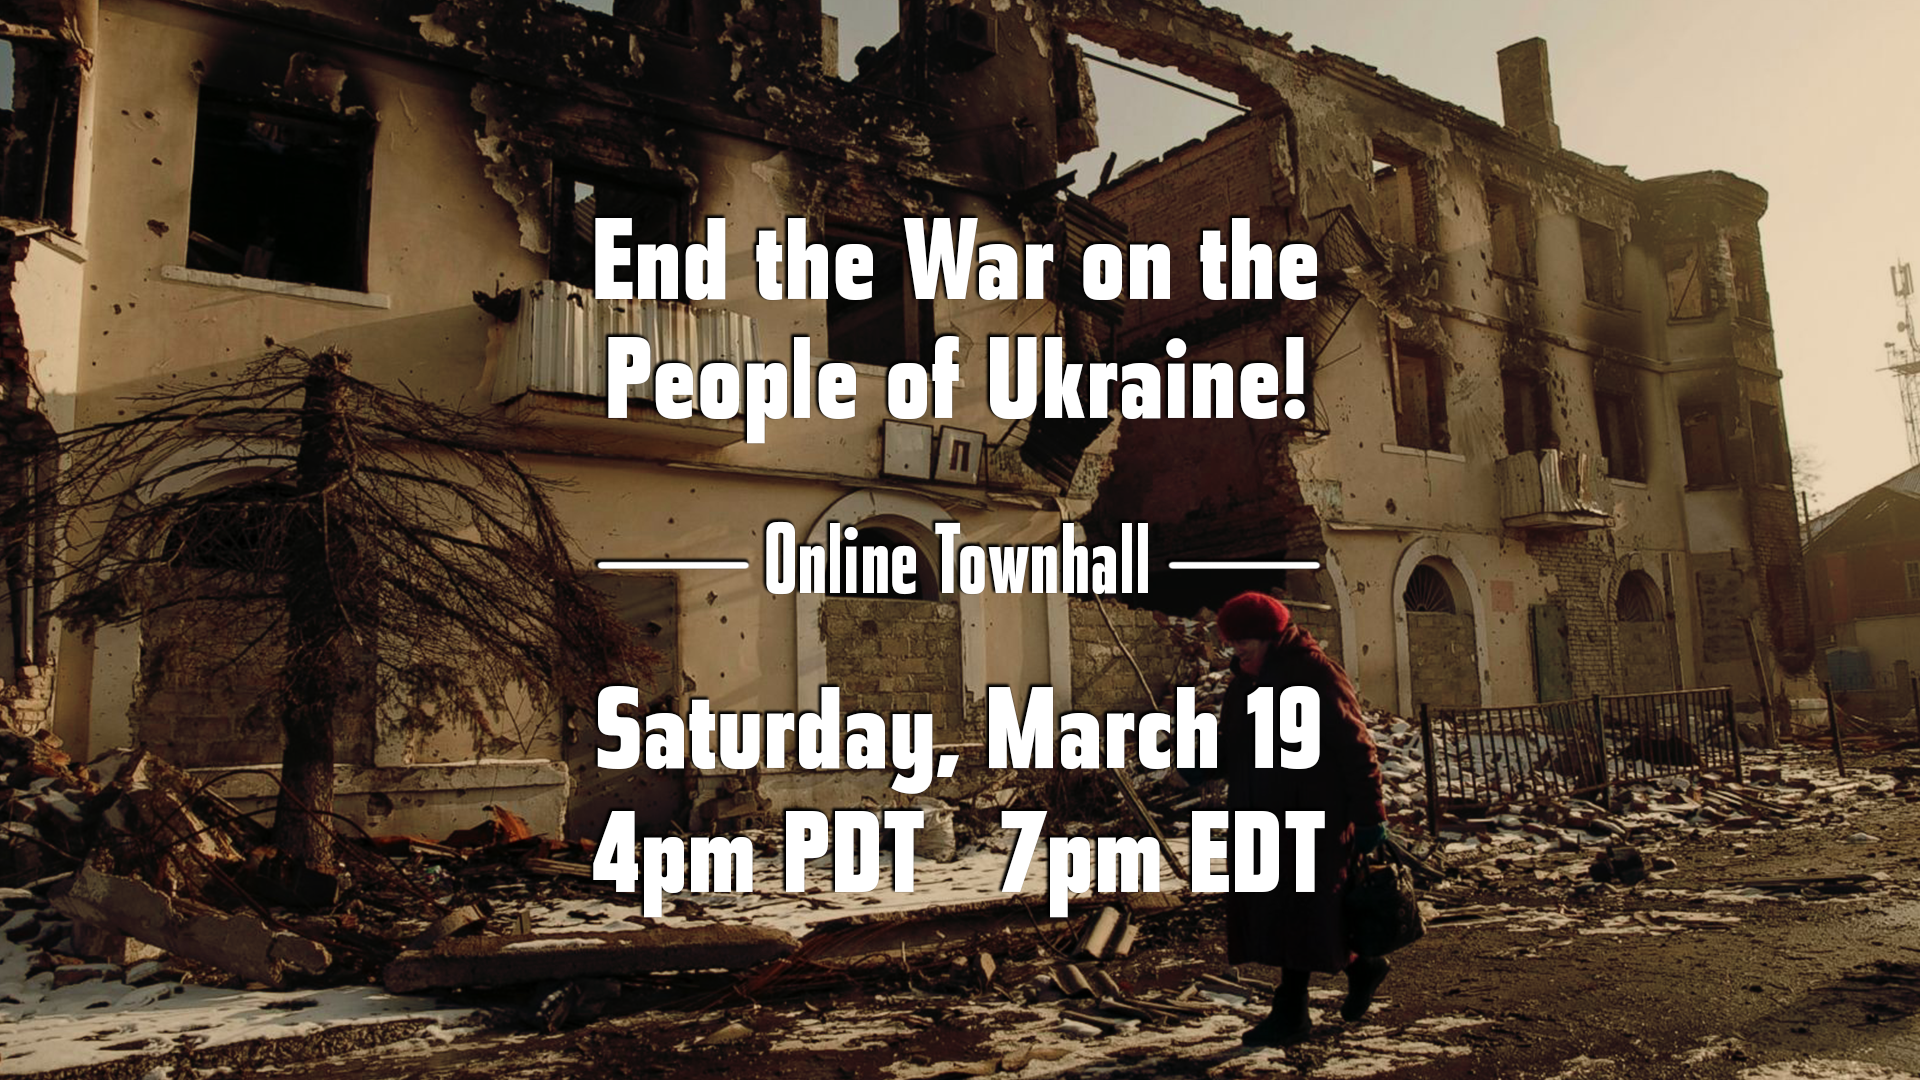 Presentation on War in Ukraine from Online Townhall on Saturday, March 19th